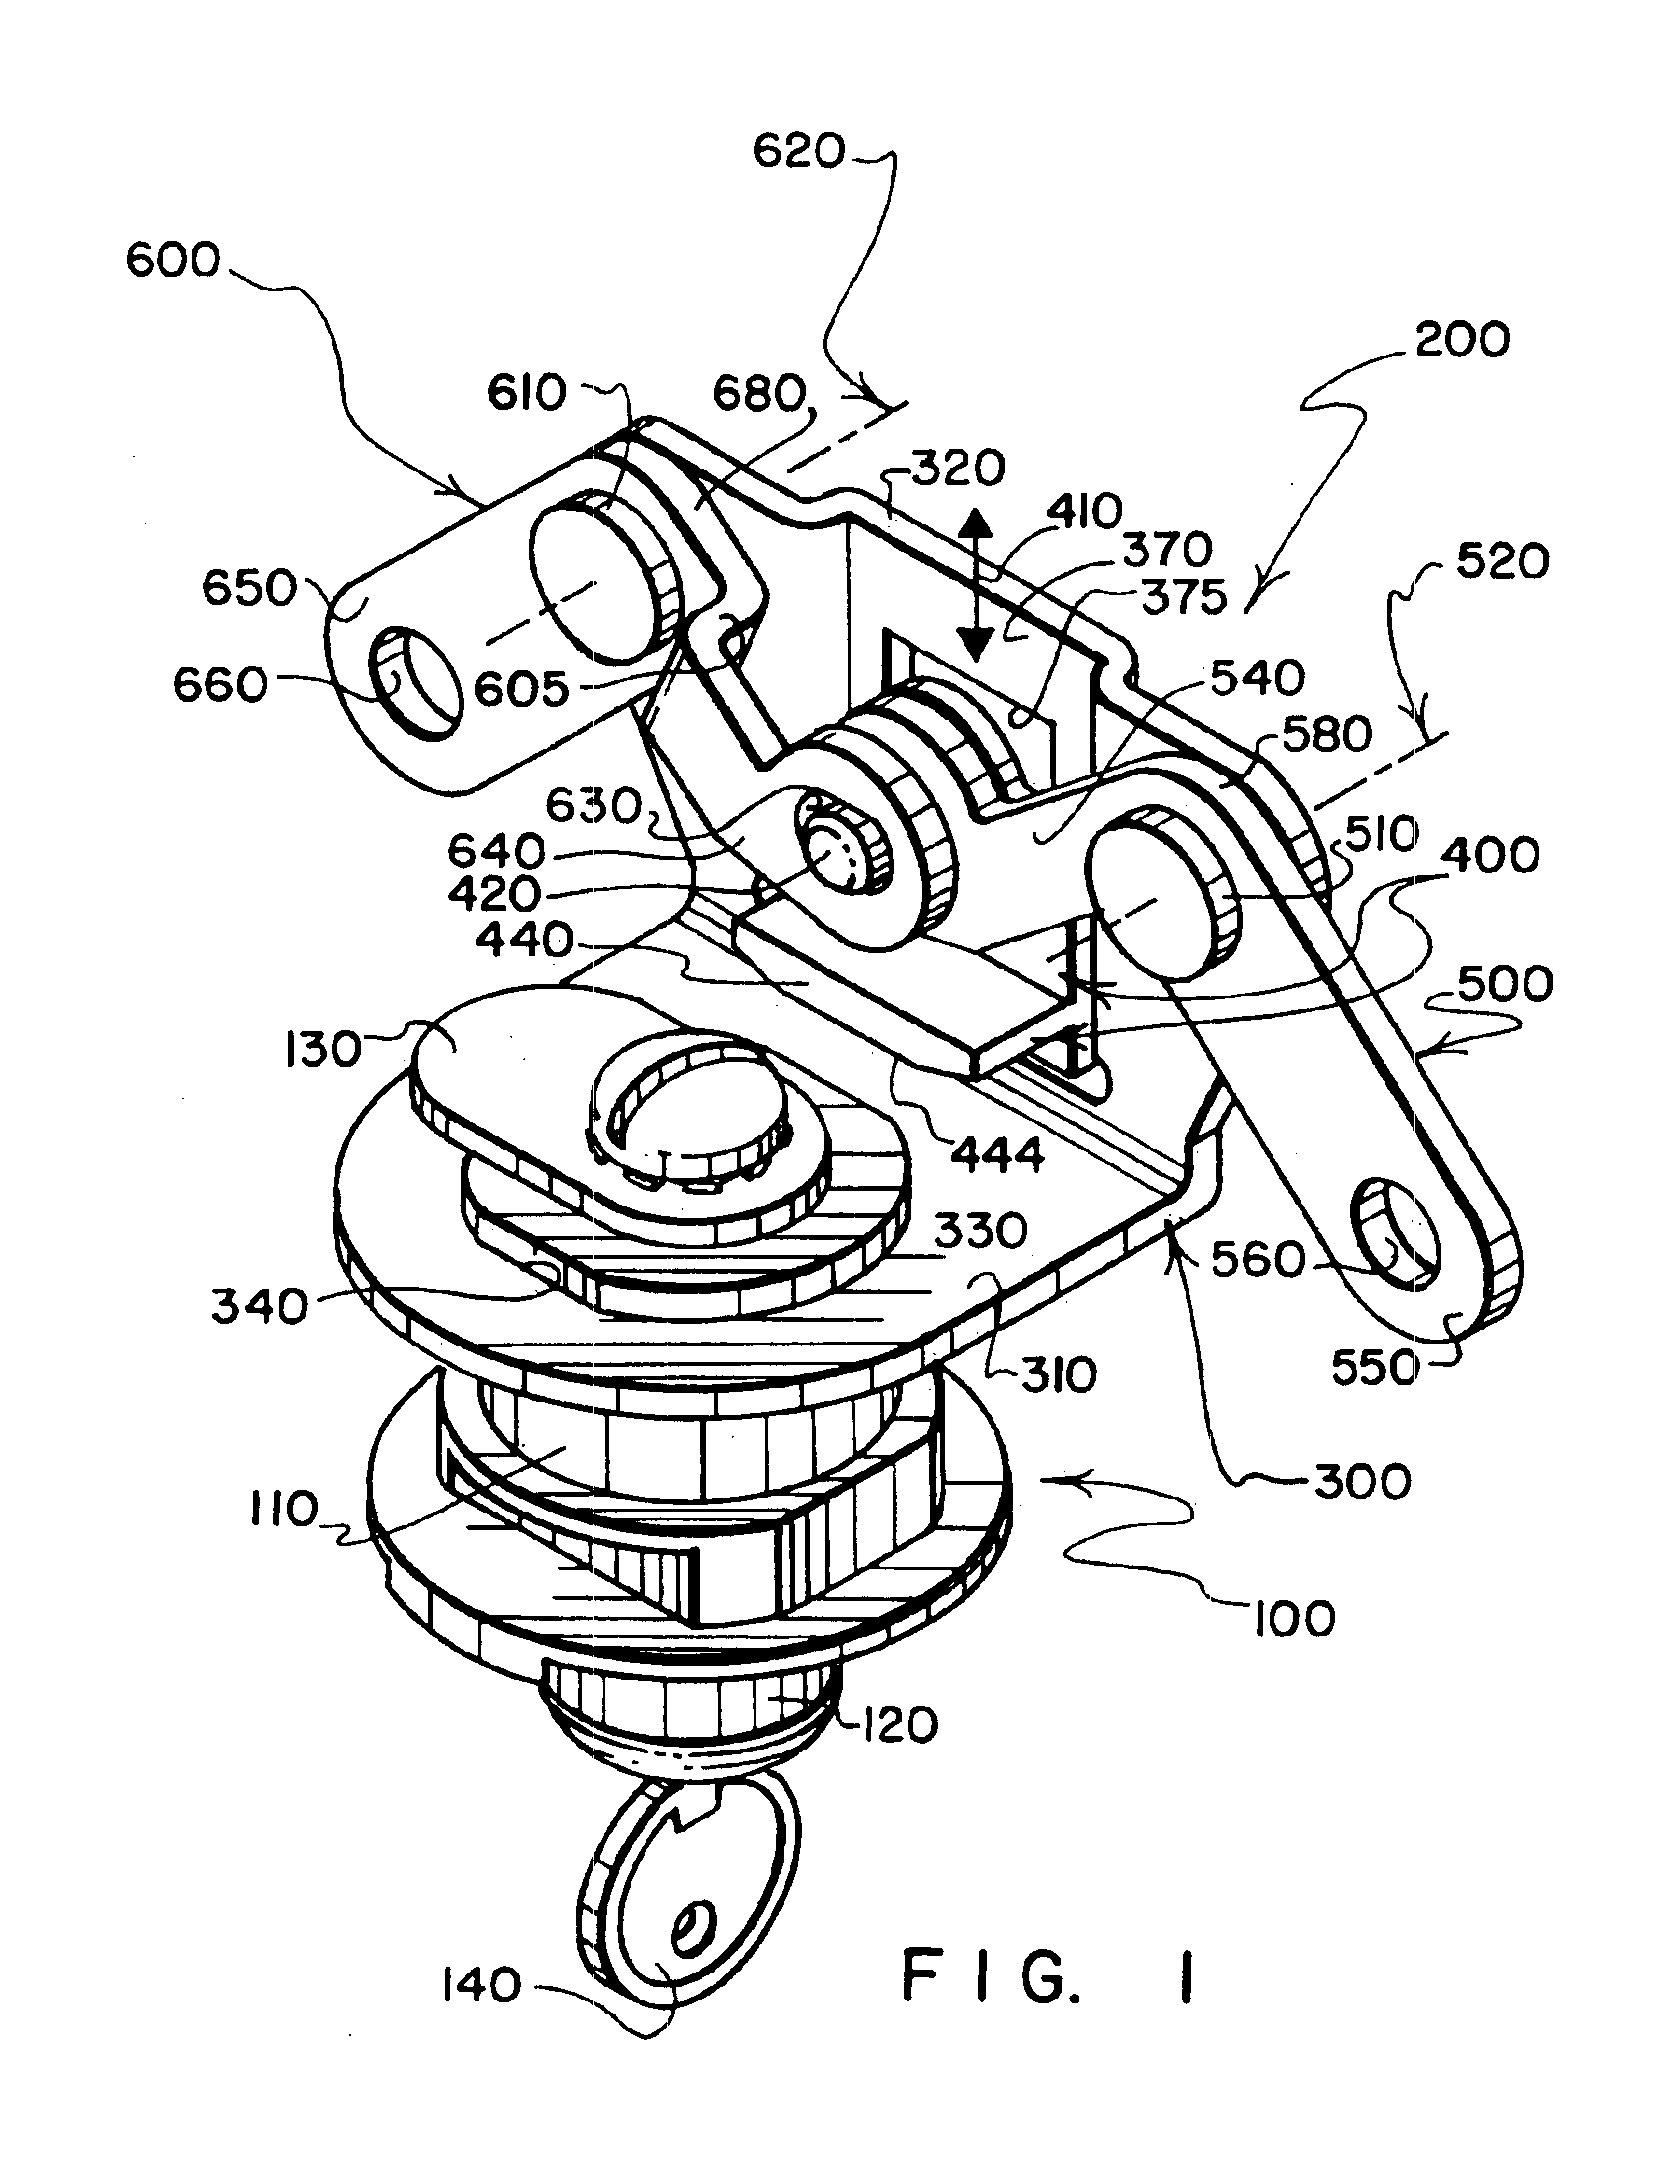 Linkage assembly for operating one or more latches